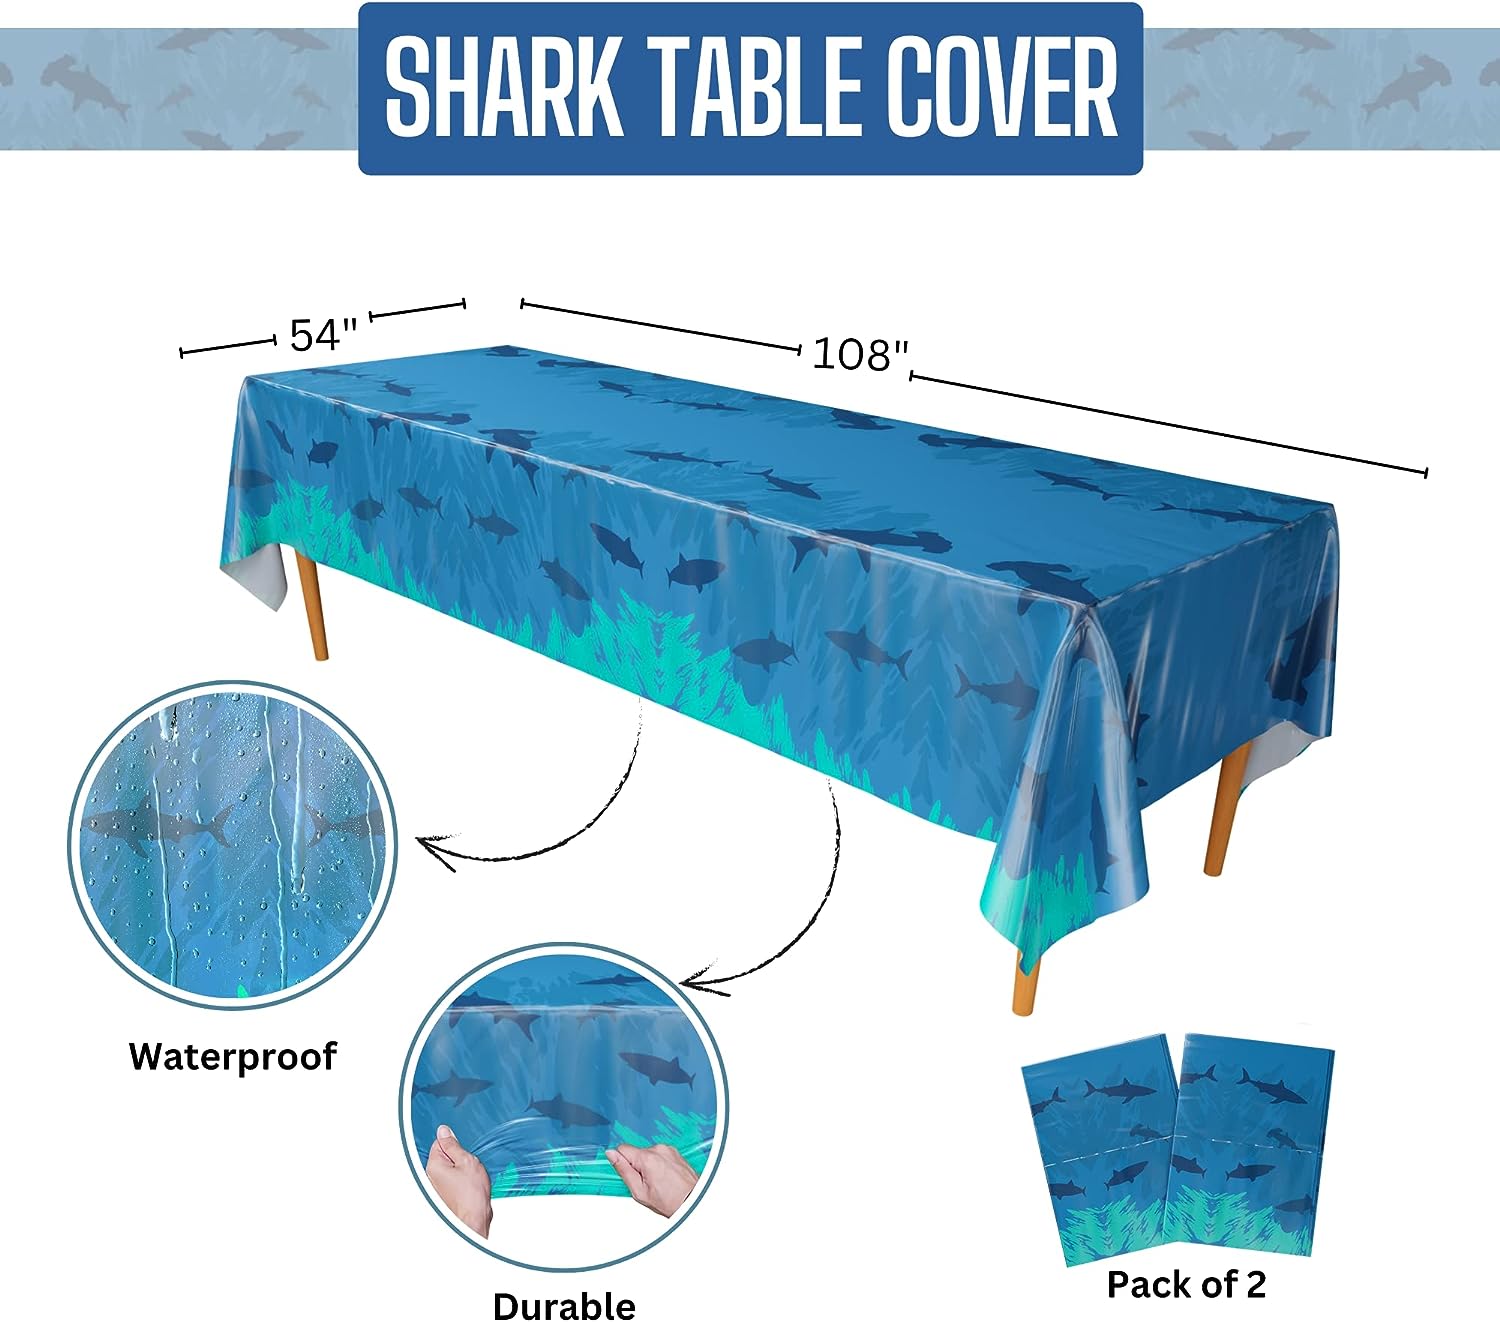 Shark Themed Plastic Table Covers with underwater-inspired design, perfect for adding a fun and adventurous touch to your party decorations.